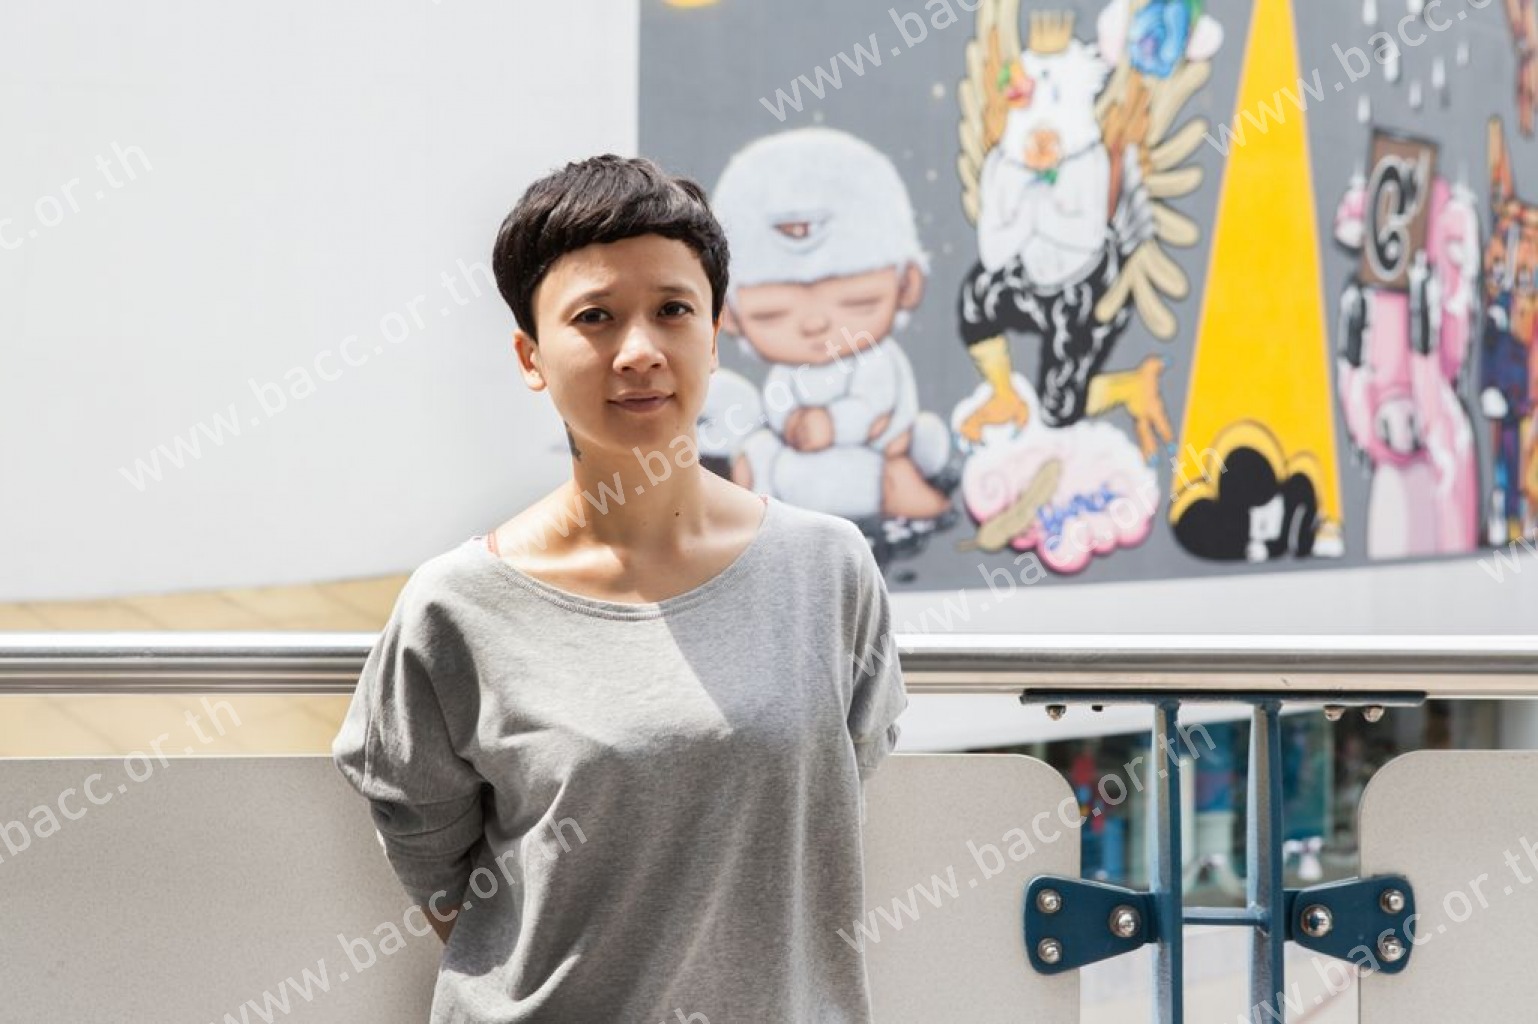 Vietnamese New Wave Contemporary Artist, Linh Phuong Nguyen wins Han Nefkens Foundation-BACC Award for Contemporary Art 2017